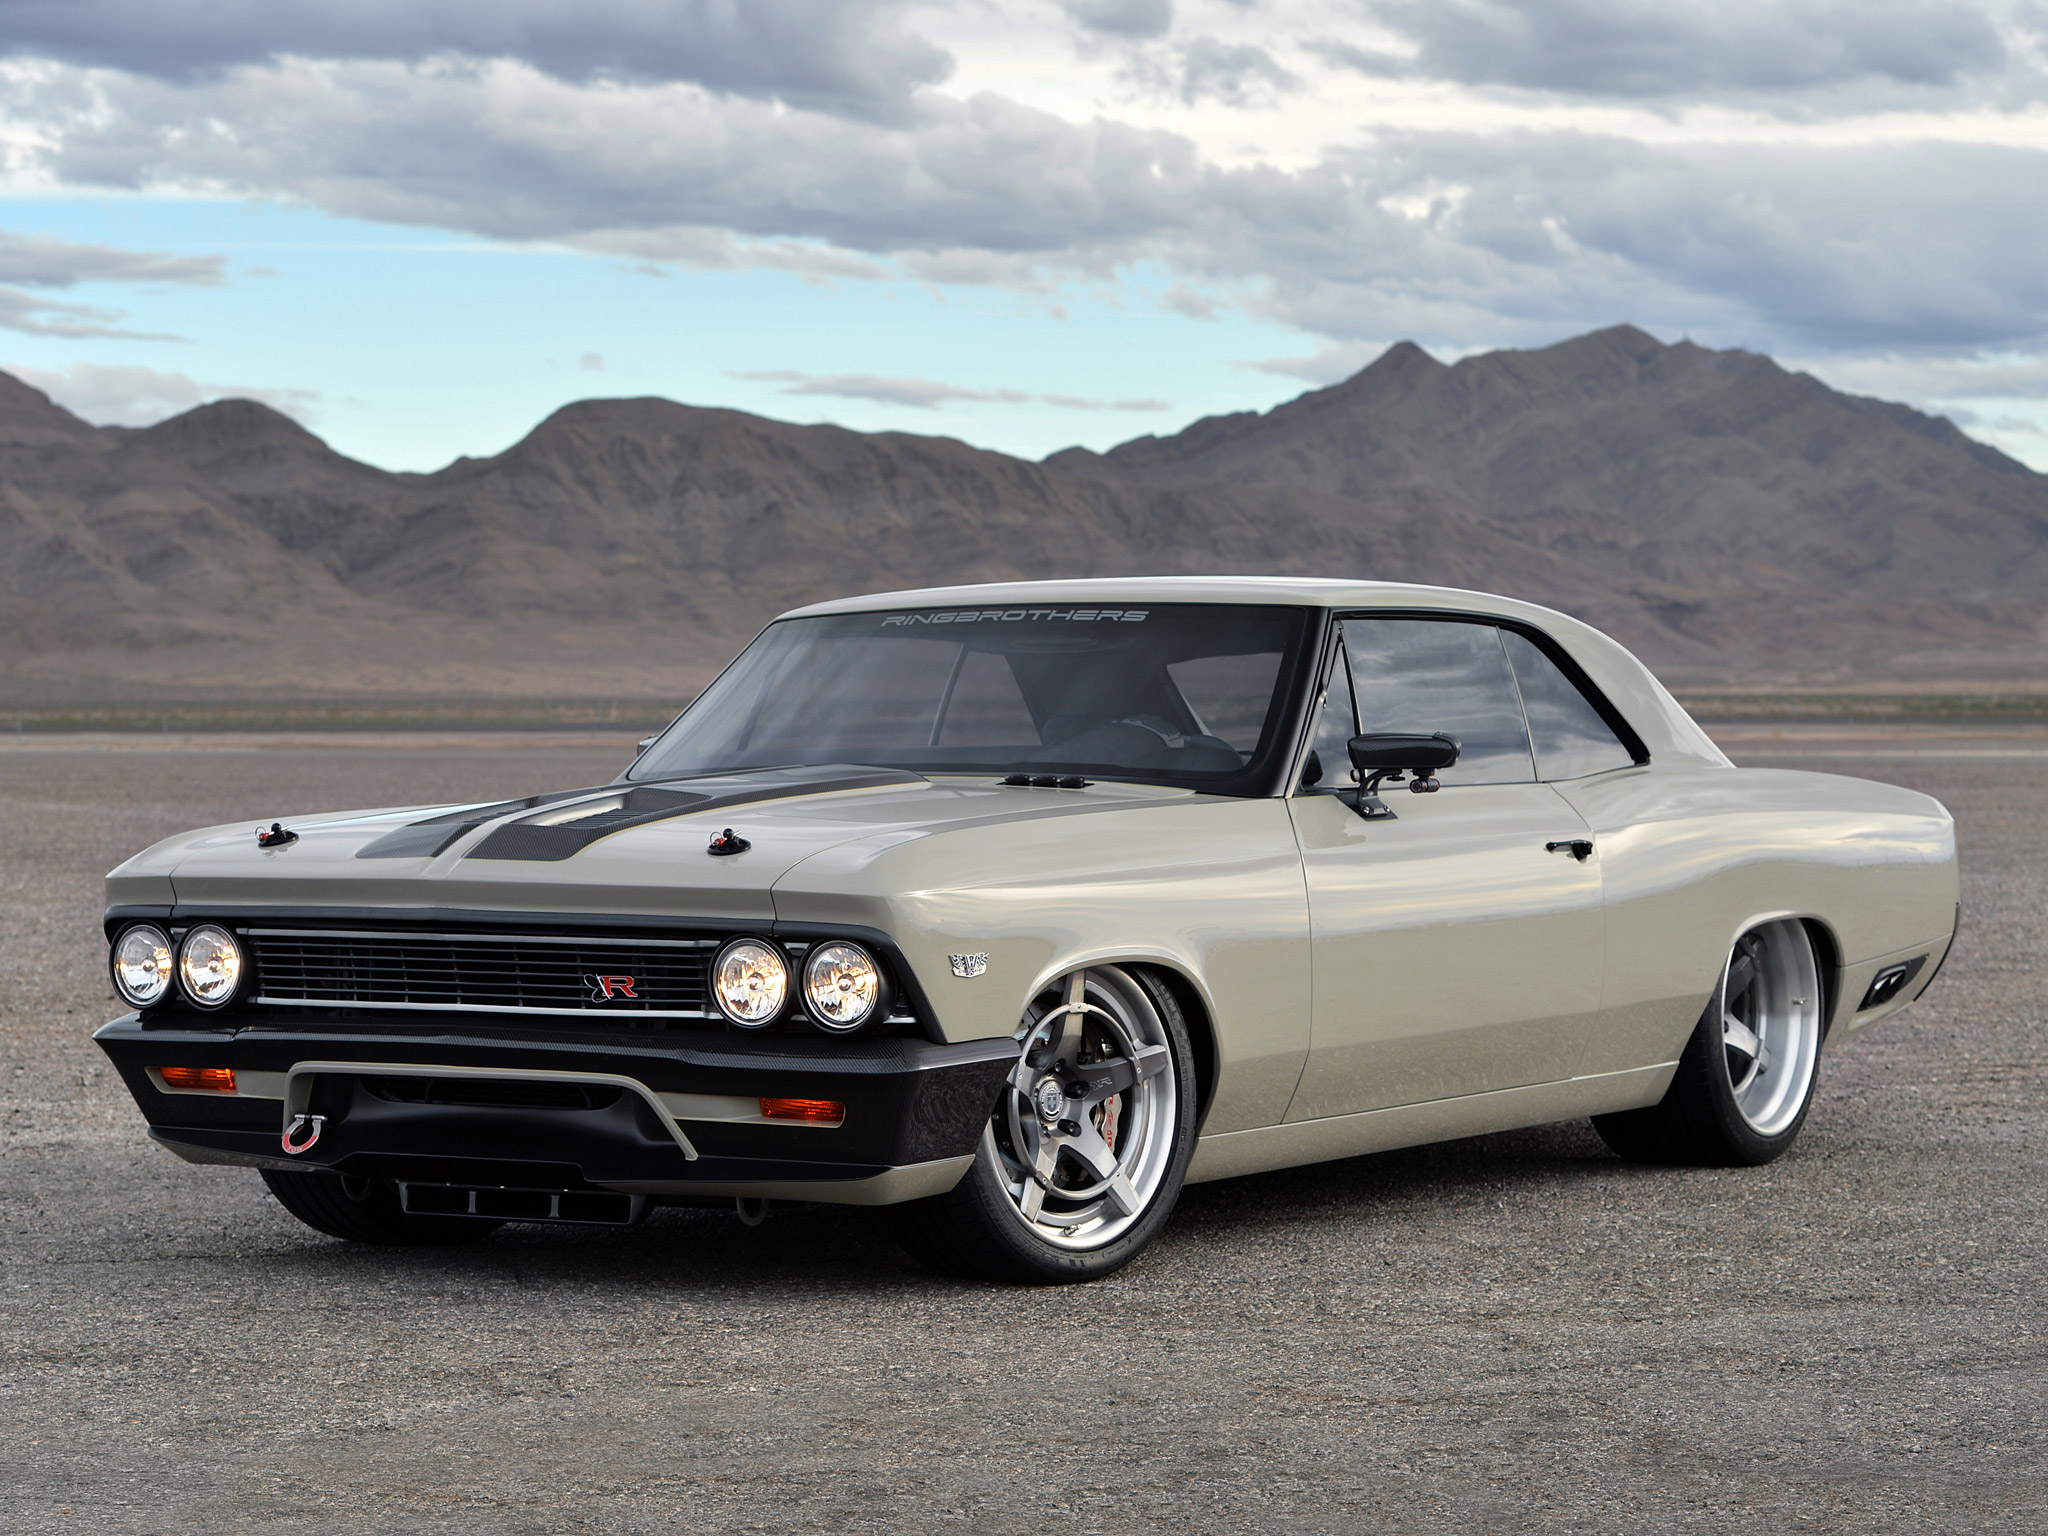  1966 Ringbrothers Chevrolet Chevelle Recoil Wallpaper.